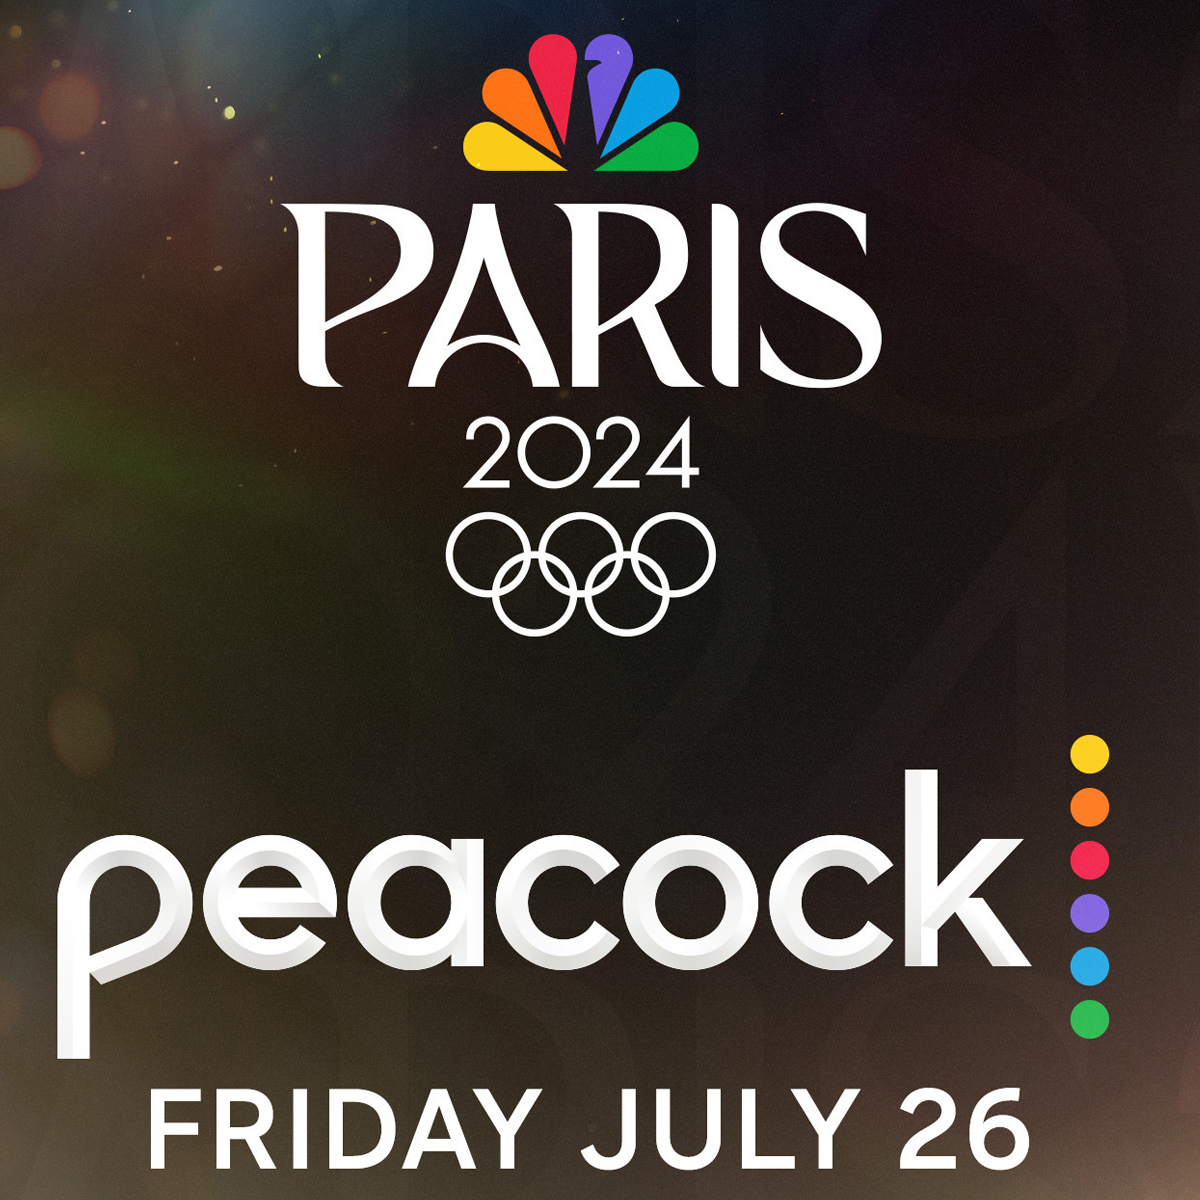 How to Watch the 2024 Paris Olympics Opening Ceremony & Games